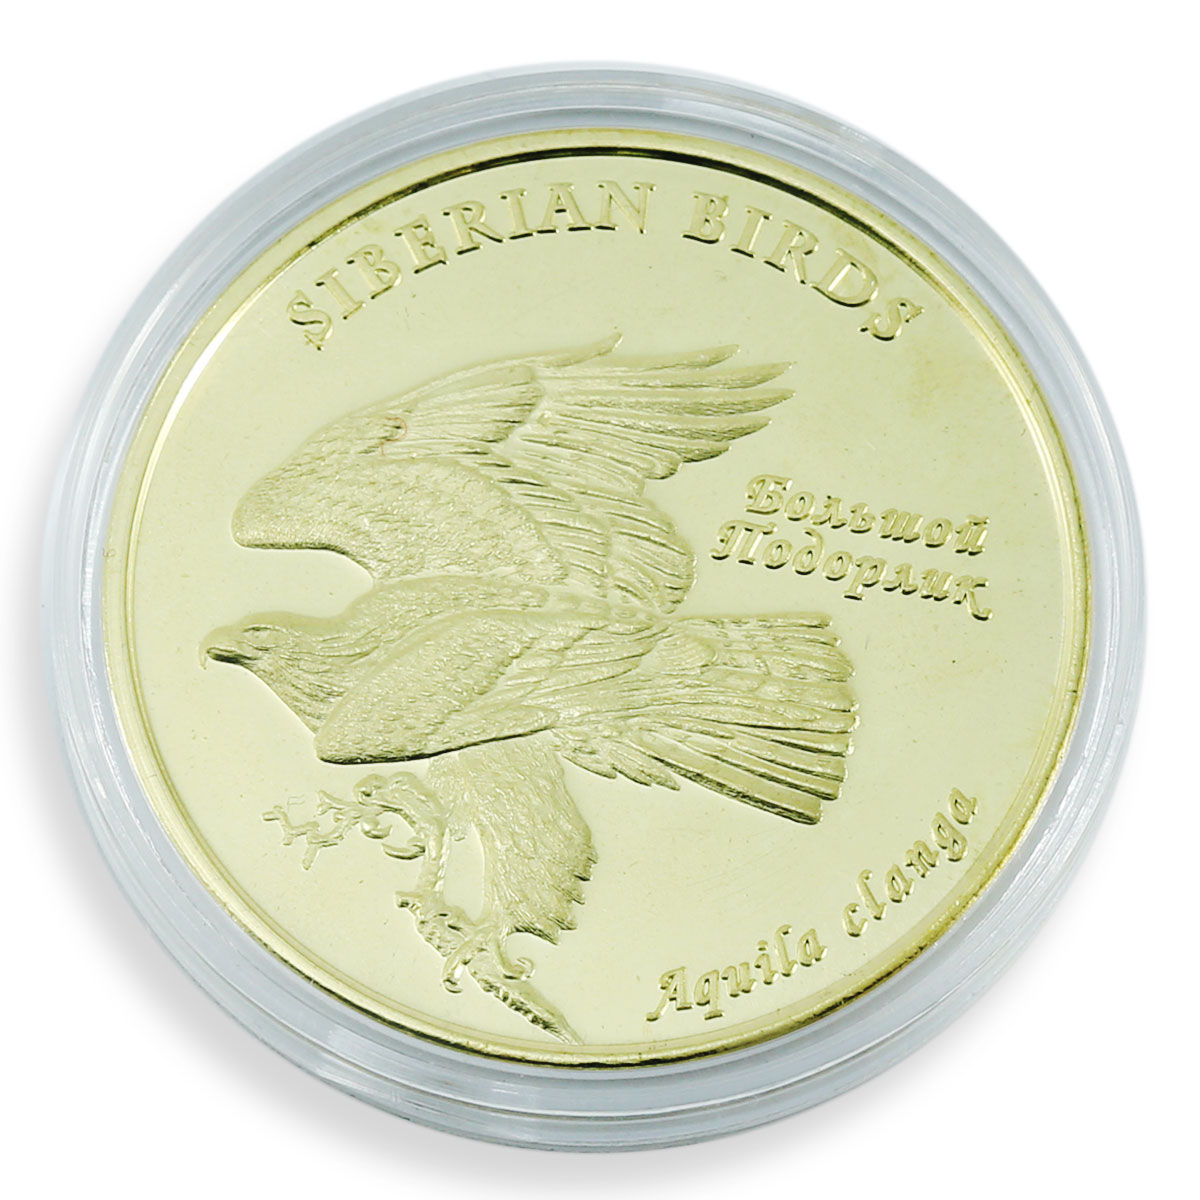 Falcon Island 5 dollars Siberian birds Greater spotted eagle coin 2018